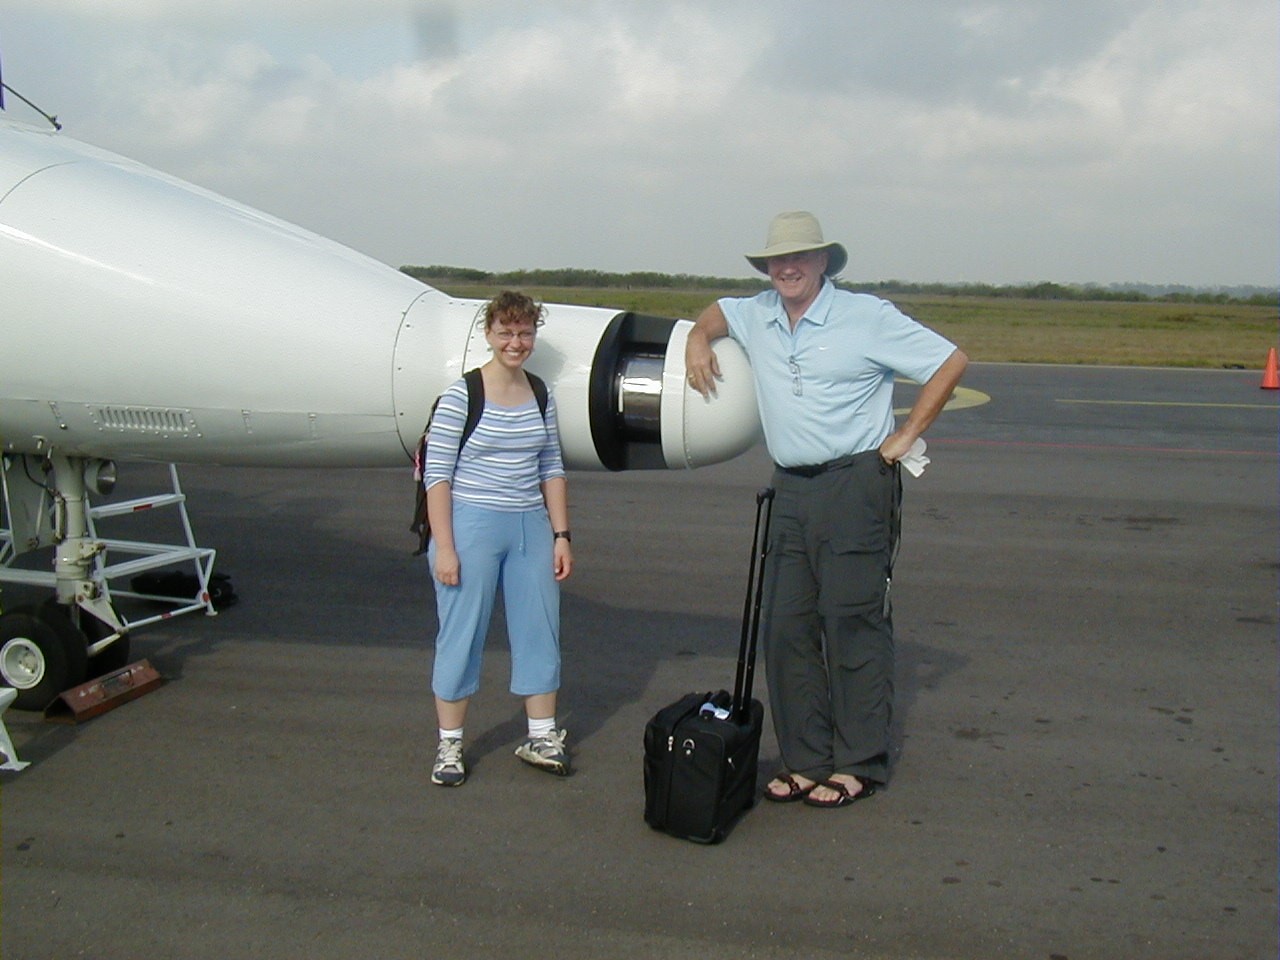 Wind in front of the plane used during her first field campaign, the MILAGRO field campaign in Veracruz, Mexico.